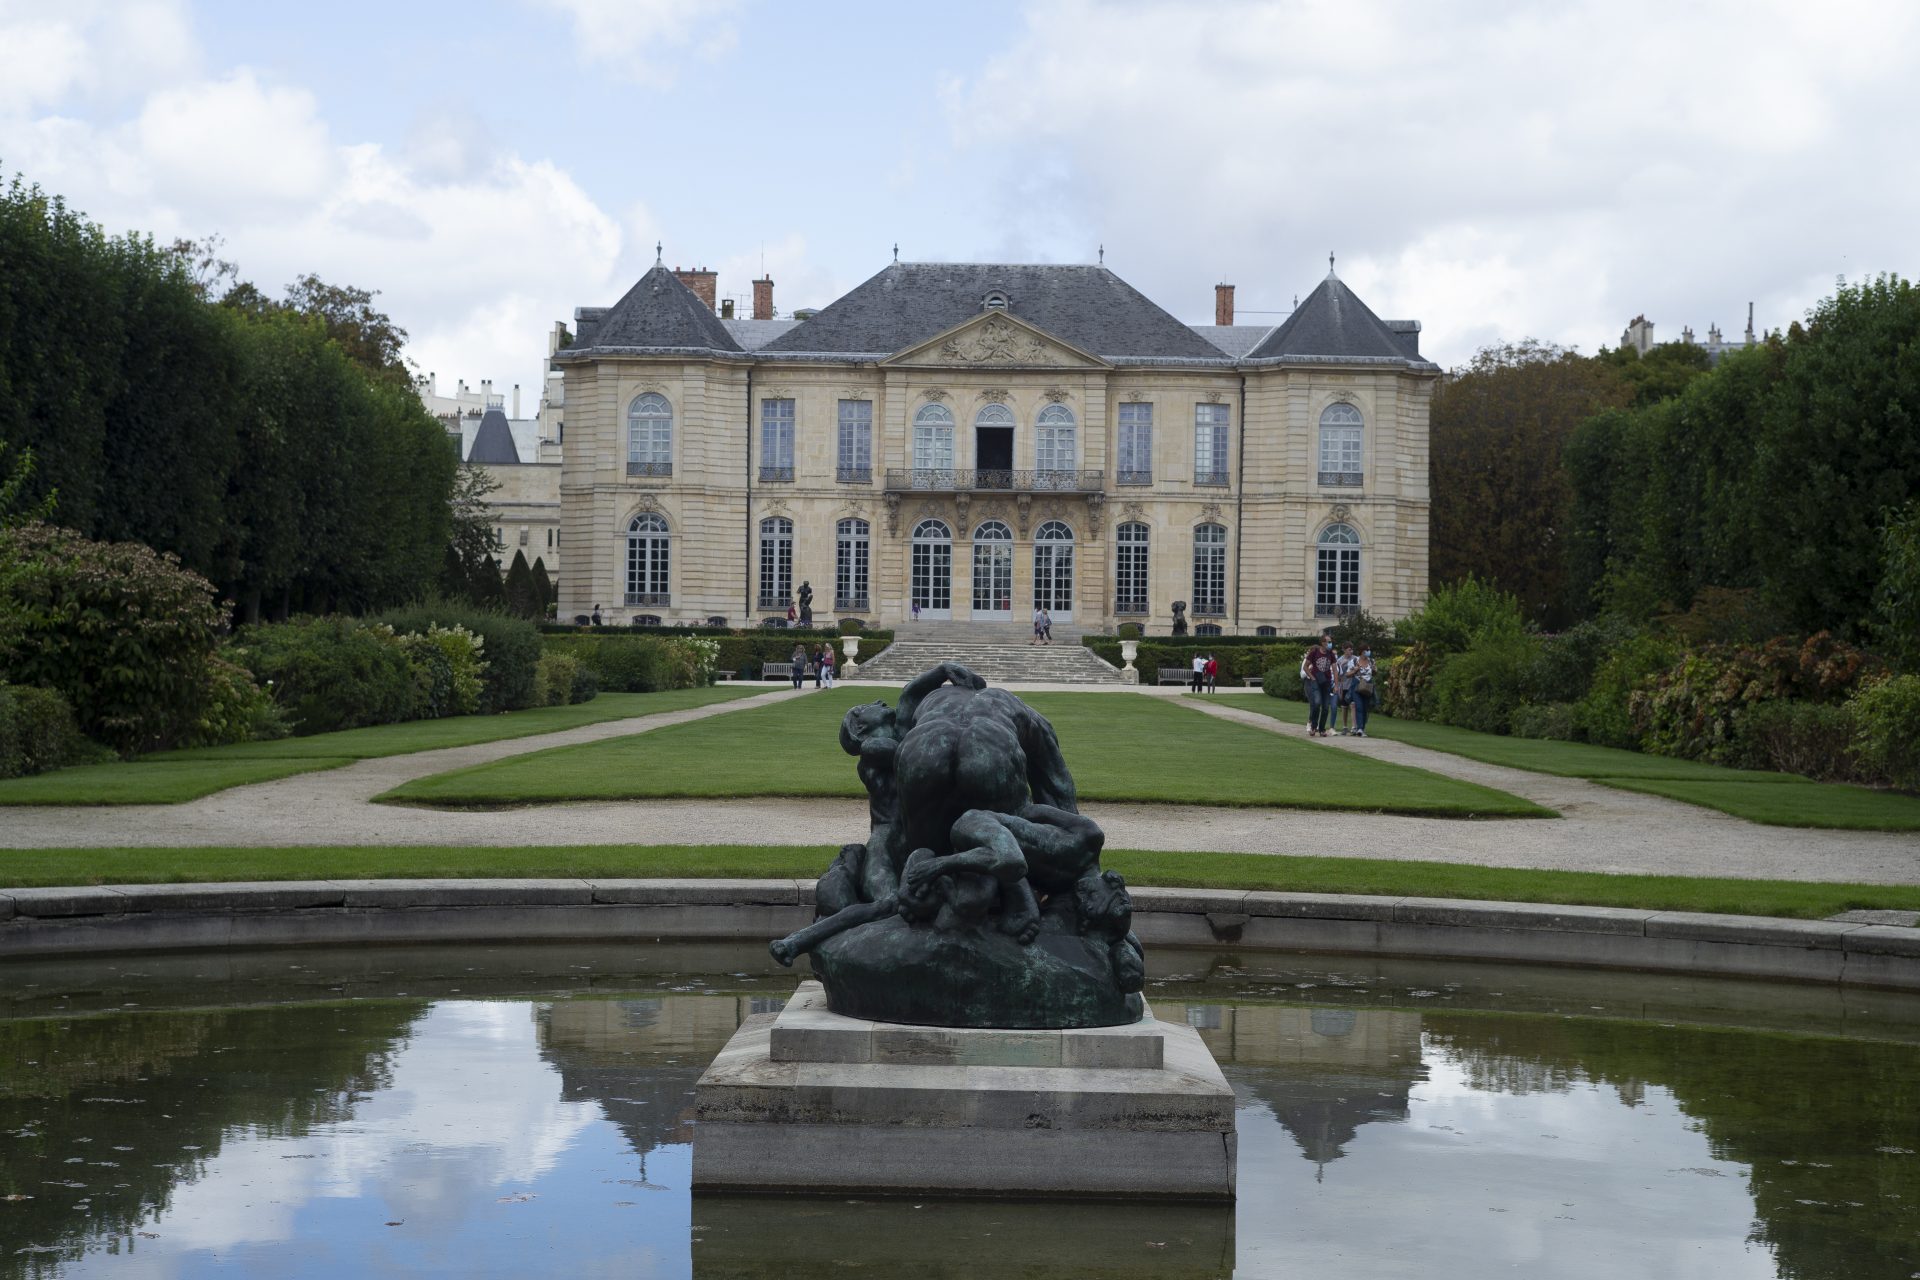 <p>Dedicated to the French sculptor Auguste Rodin, this museum is one of the best in Paris. Its exterior is also highly appreciated by visitors for its elegance. With its shaded walkways, pond, and green spaces dotted with sculptures, the garden is a picturesque extension of the museum itself!</p>